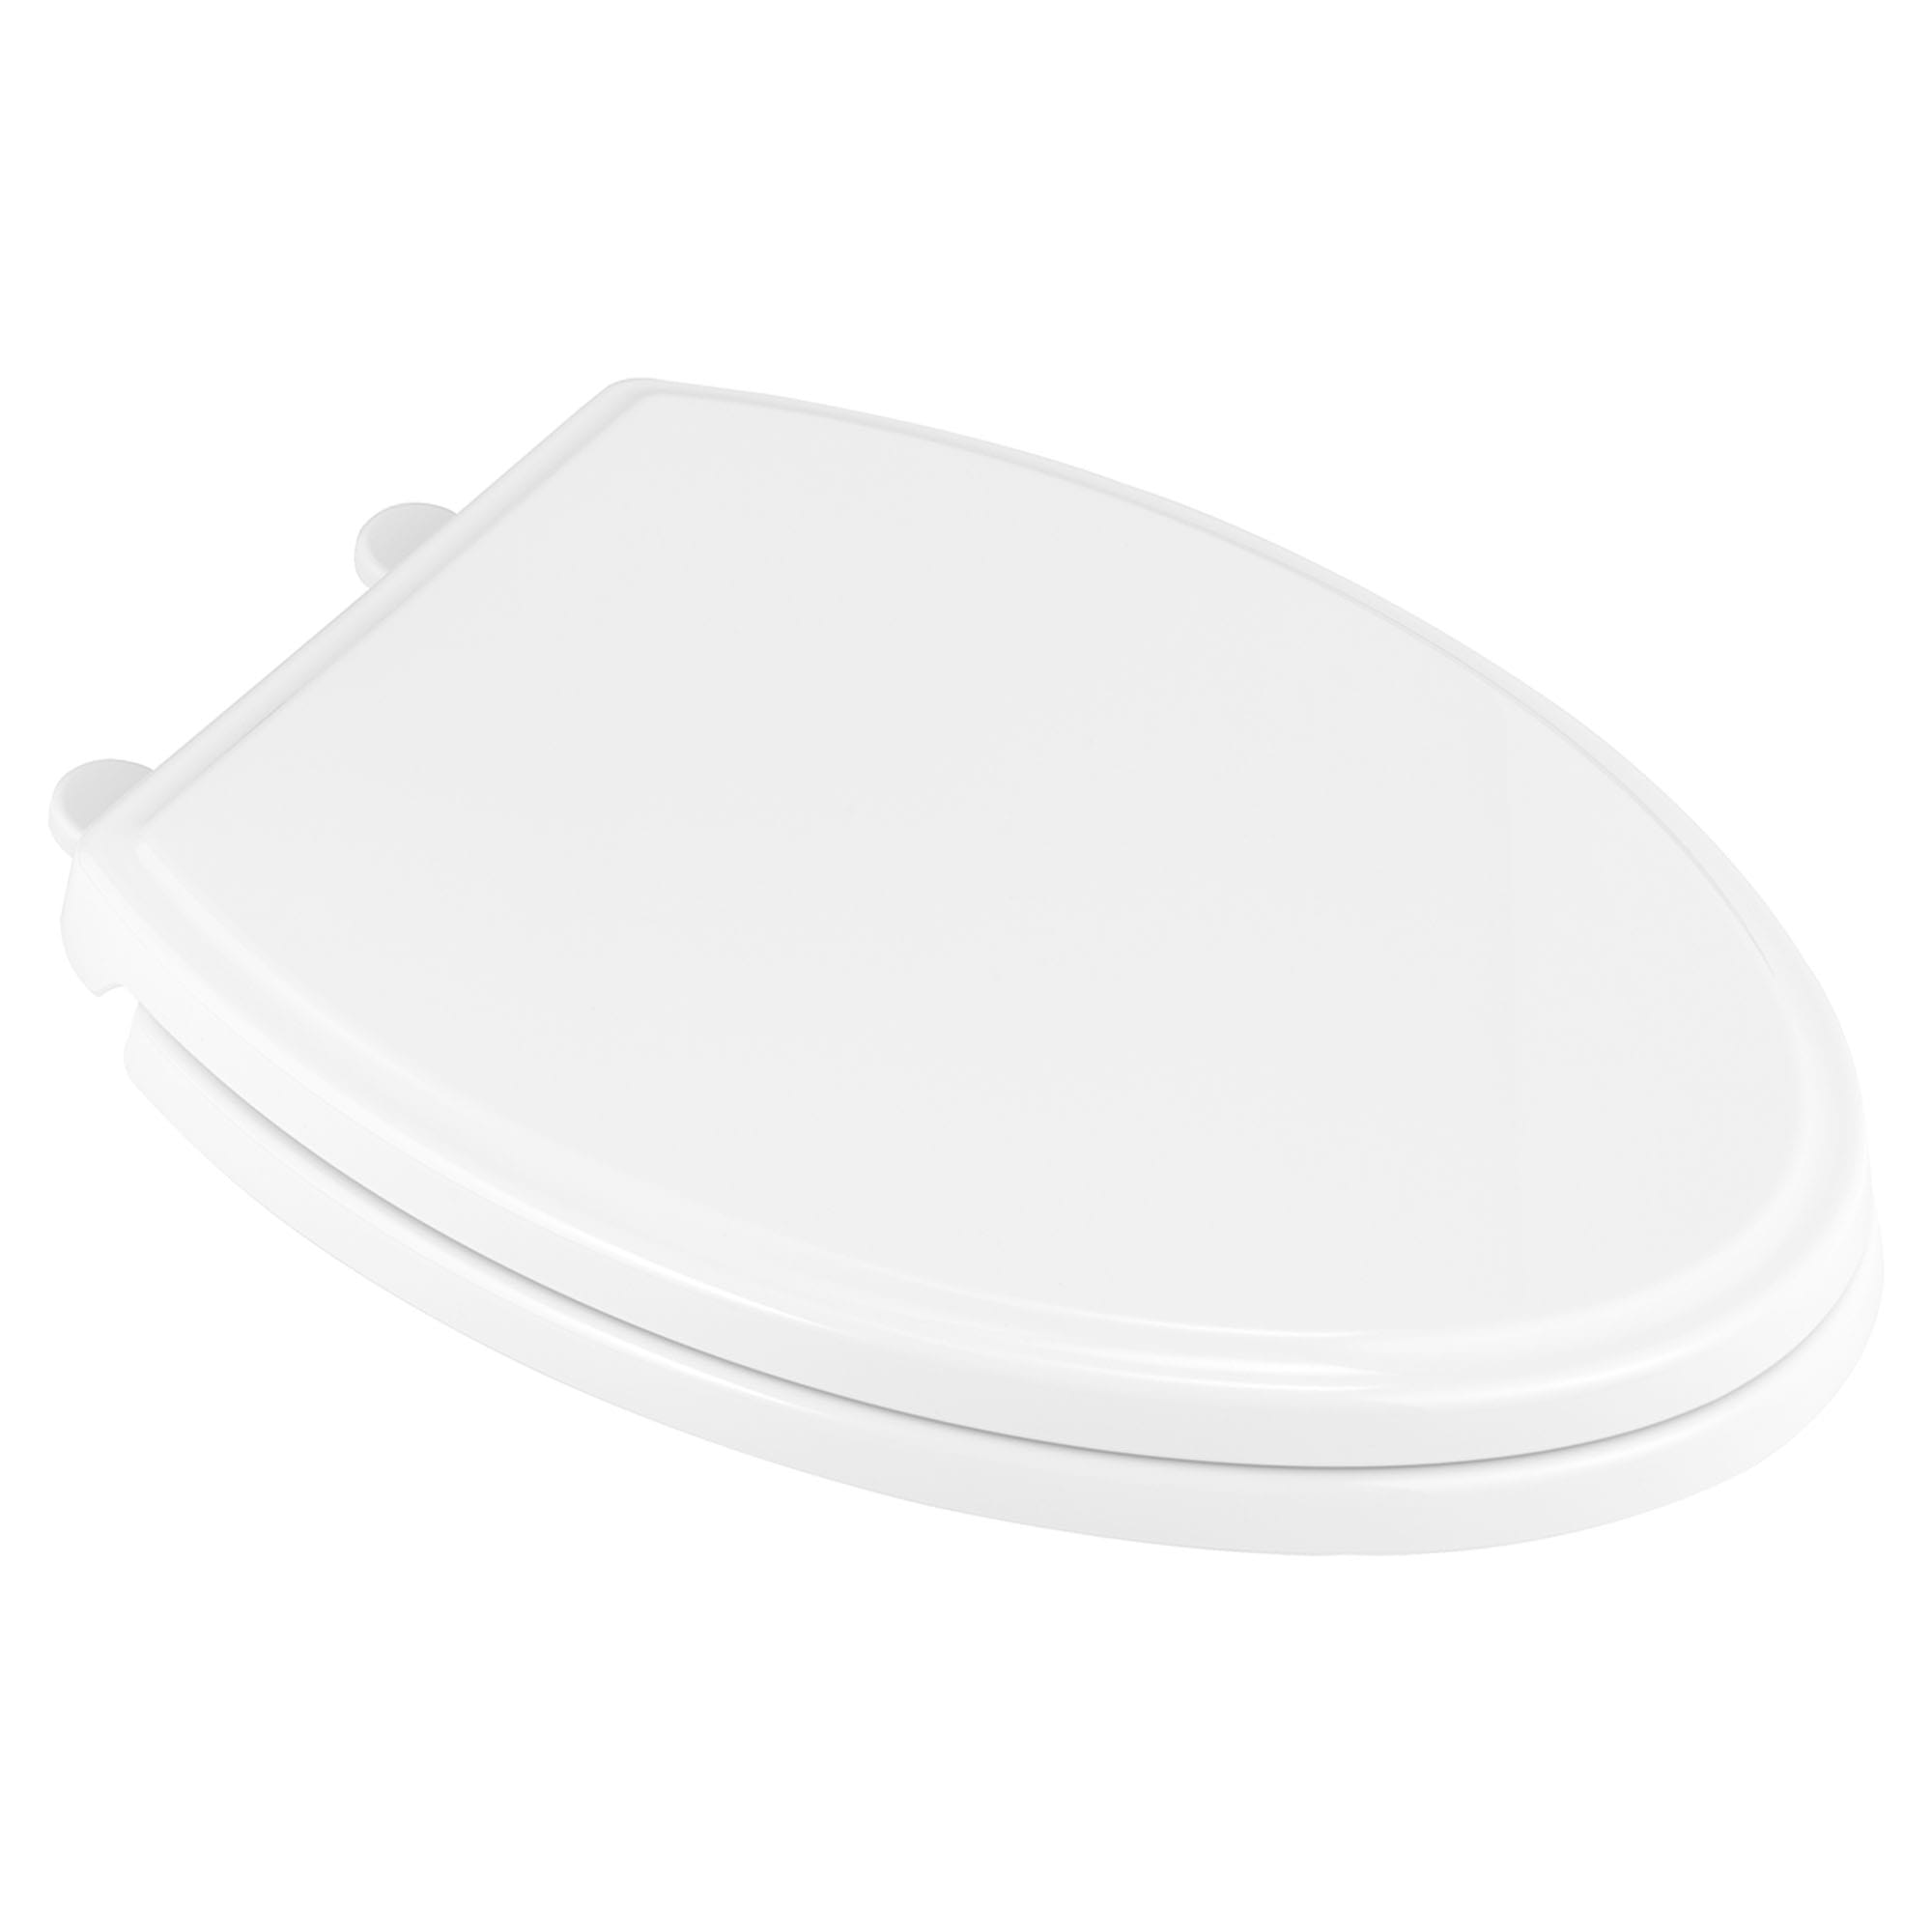 Traditional Slow Close and Easy Lift Off Elongated Toilet Seat WHITE